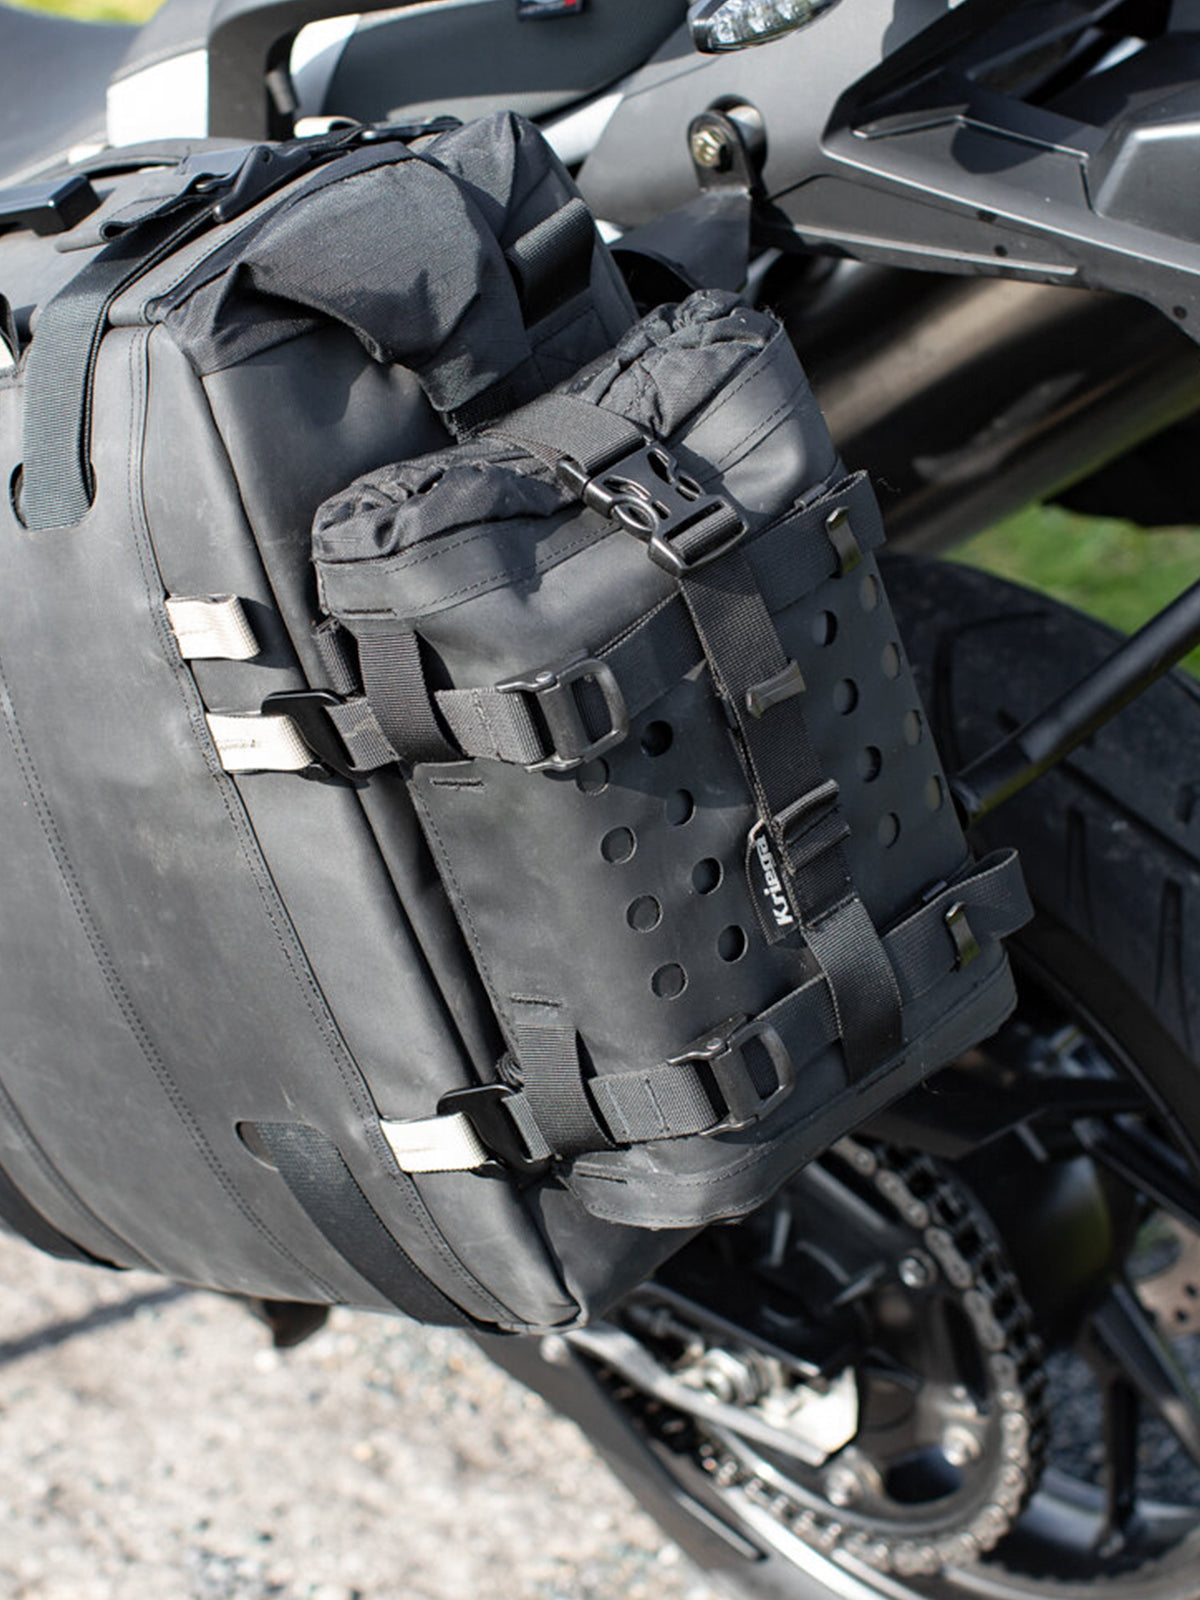 Kriega OS Bottle fitted to panniers on motorcycle